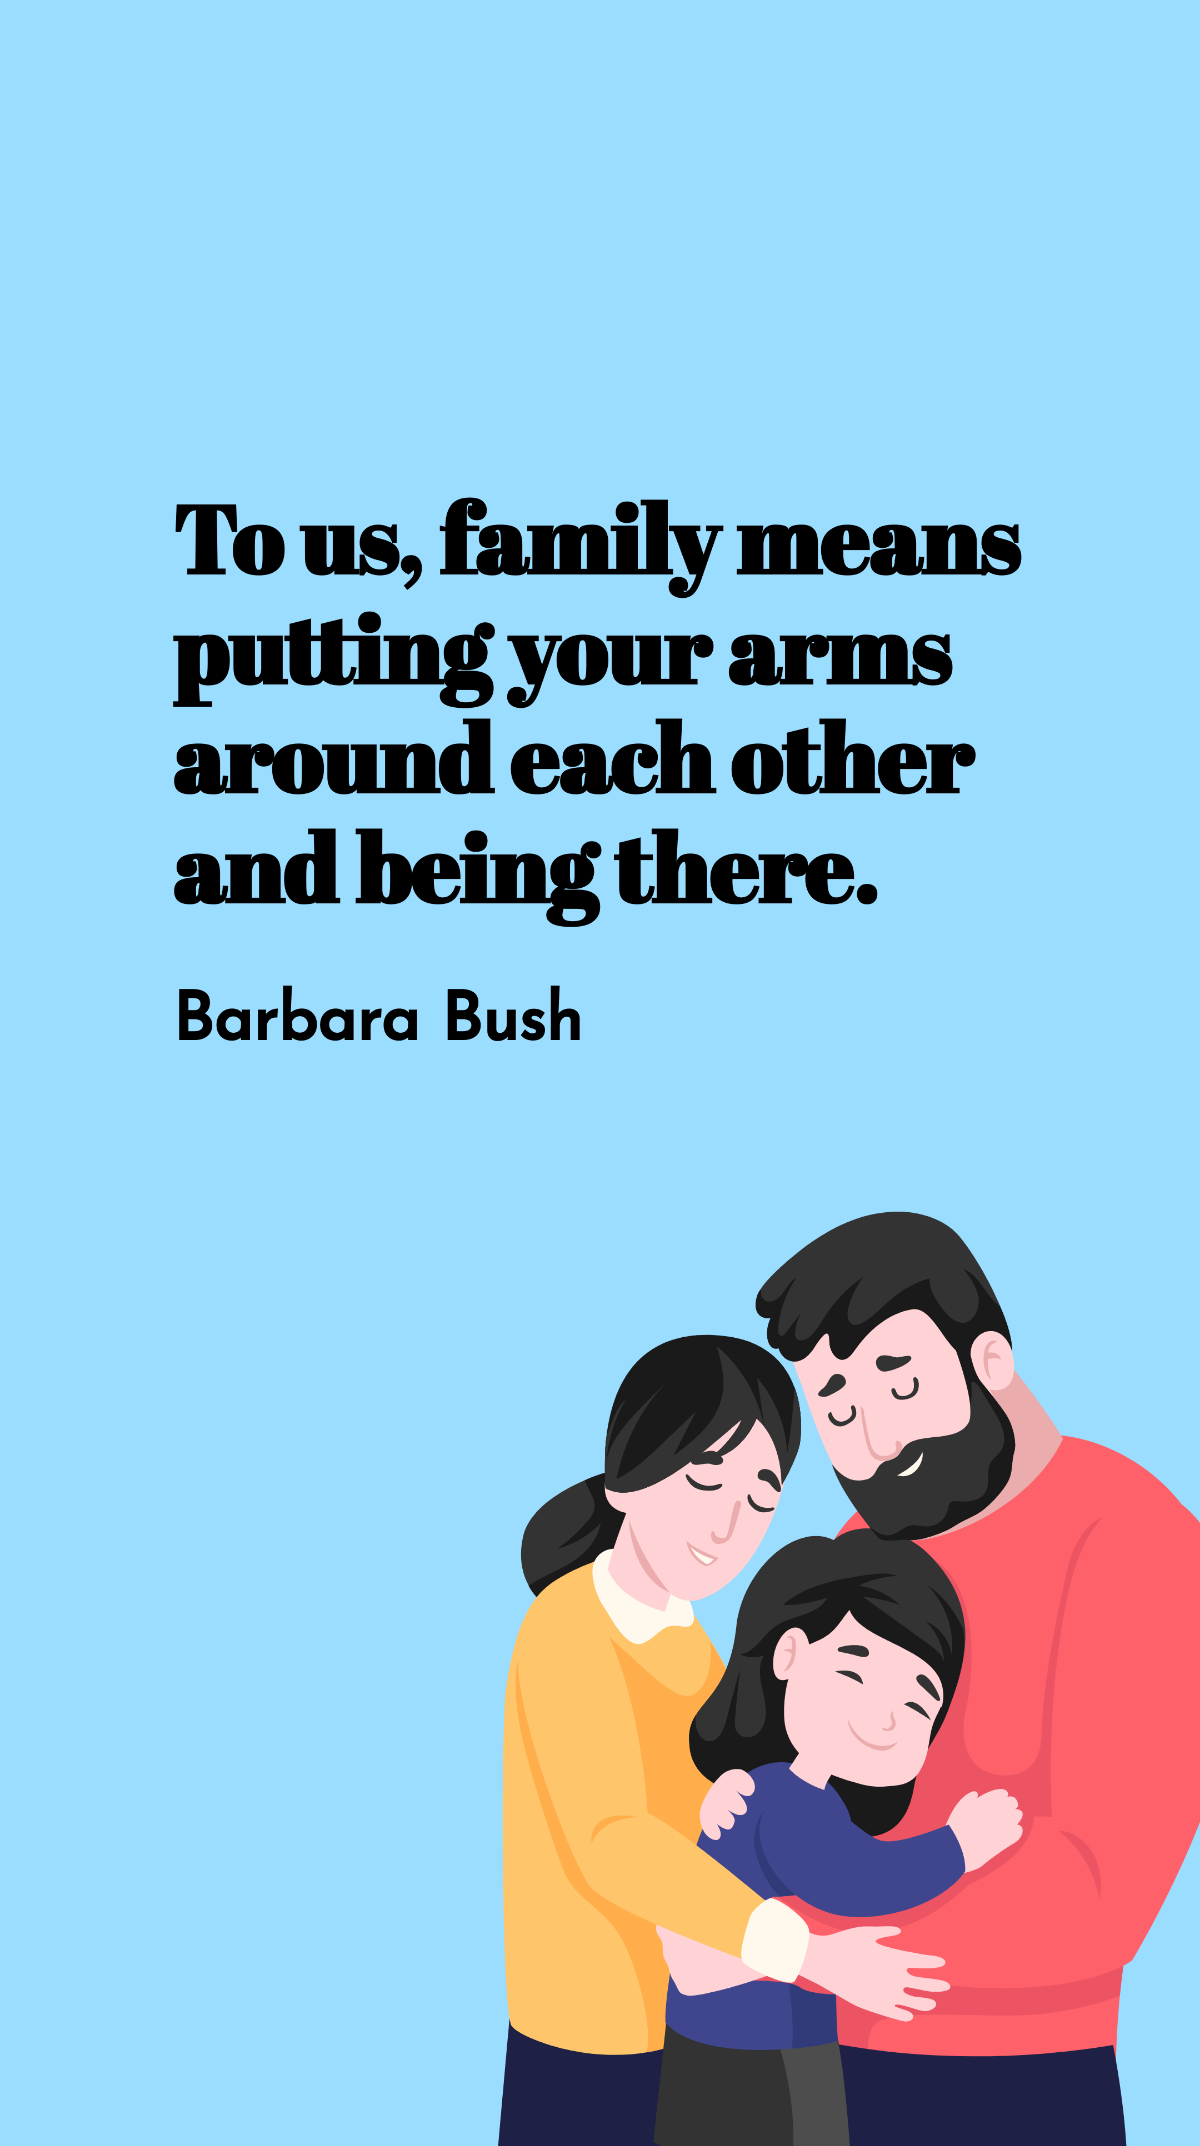 Barbara Bush - To us, family means putting your arms around each other and being there. Template